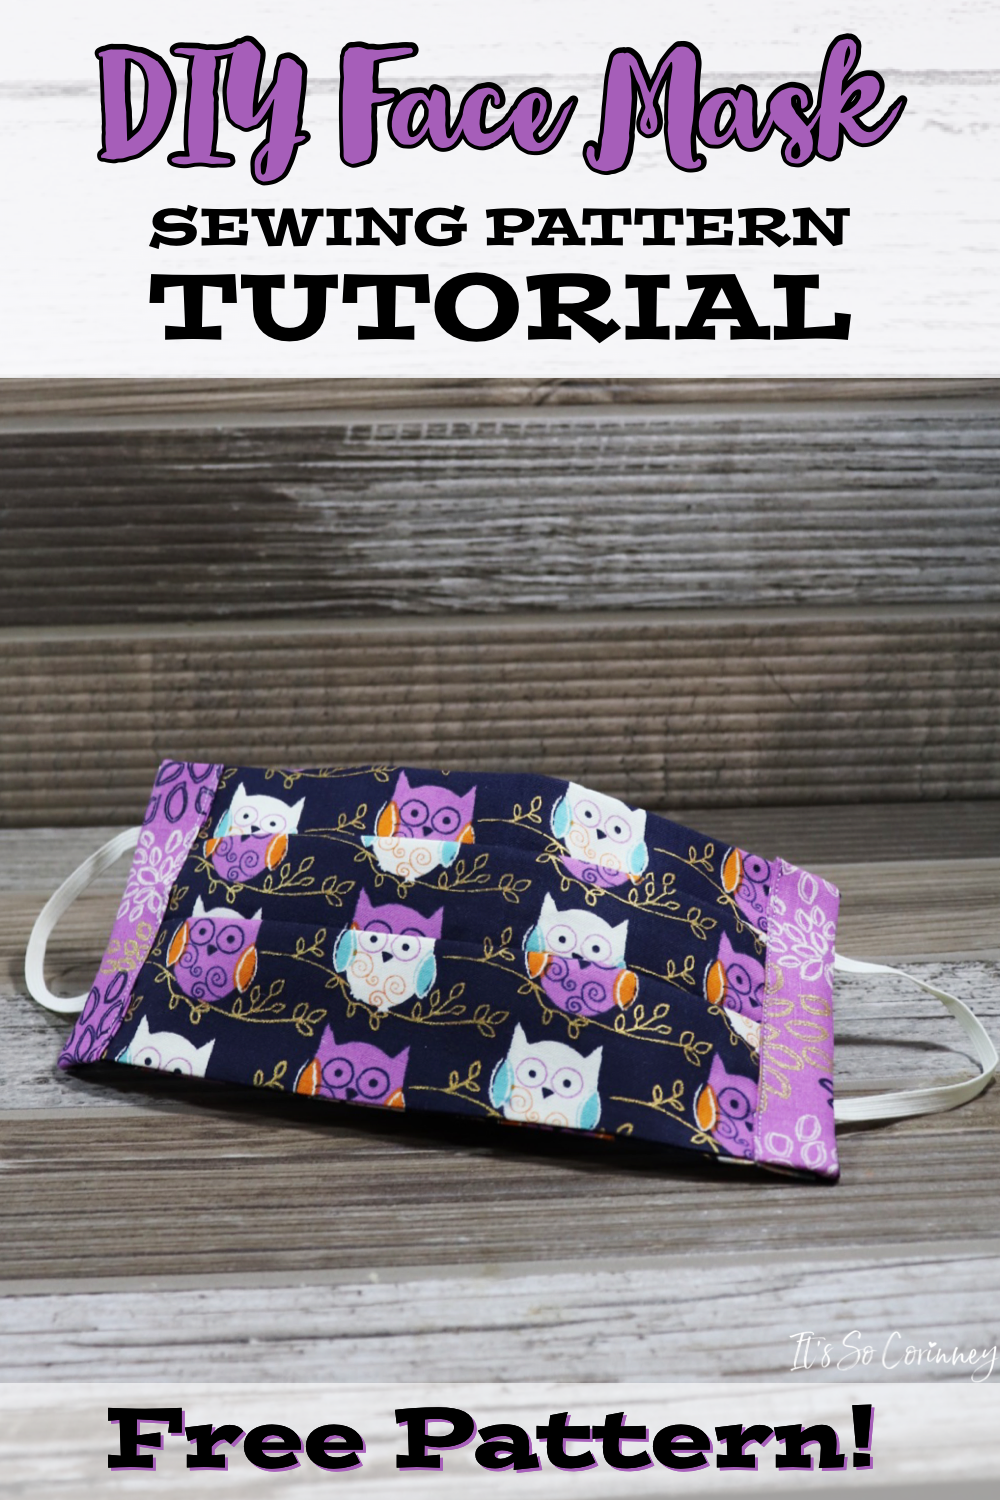 Journal Pen Holder Sewing Tutorial - It's So Corinney